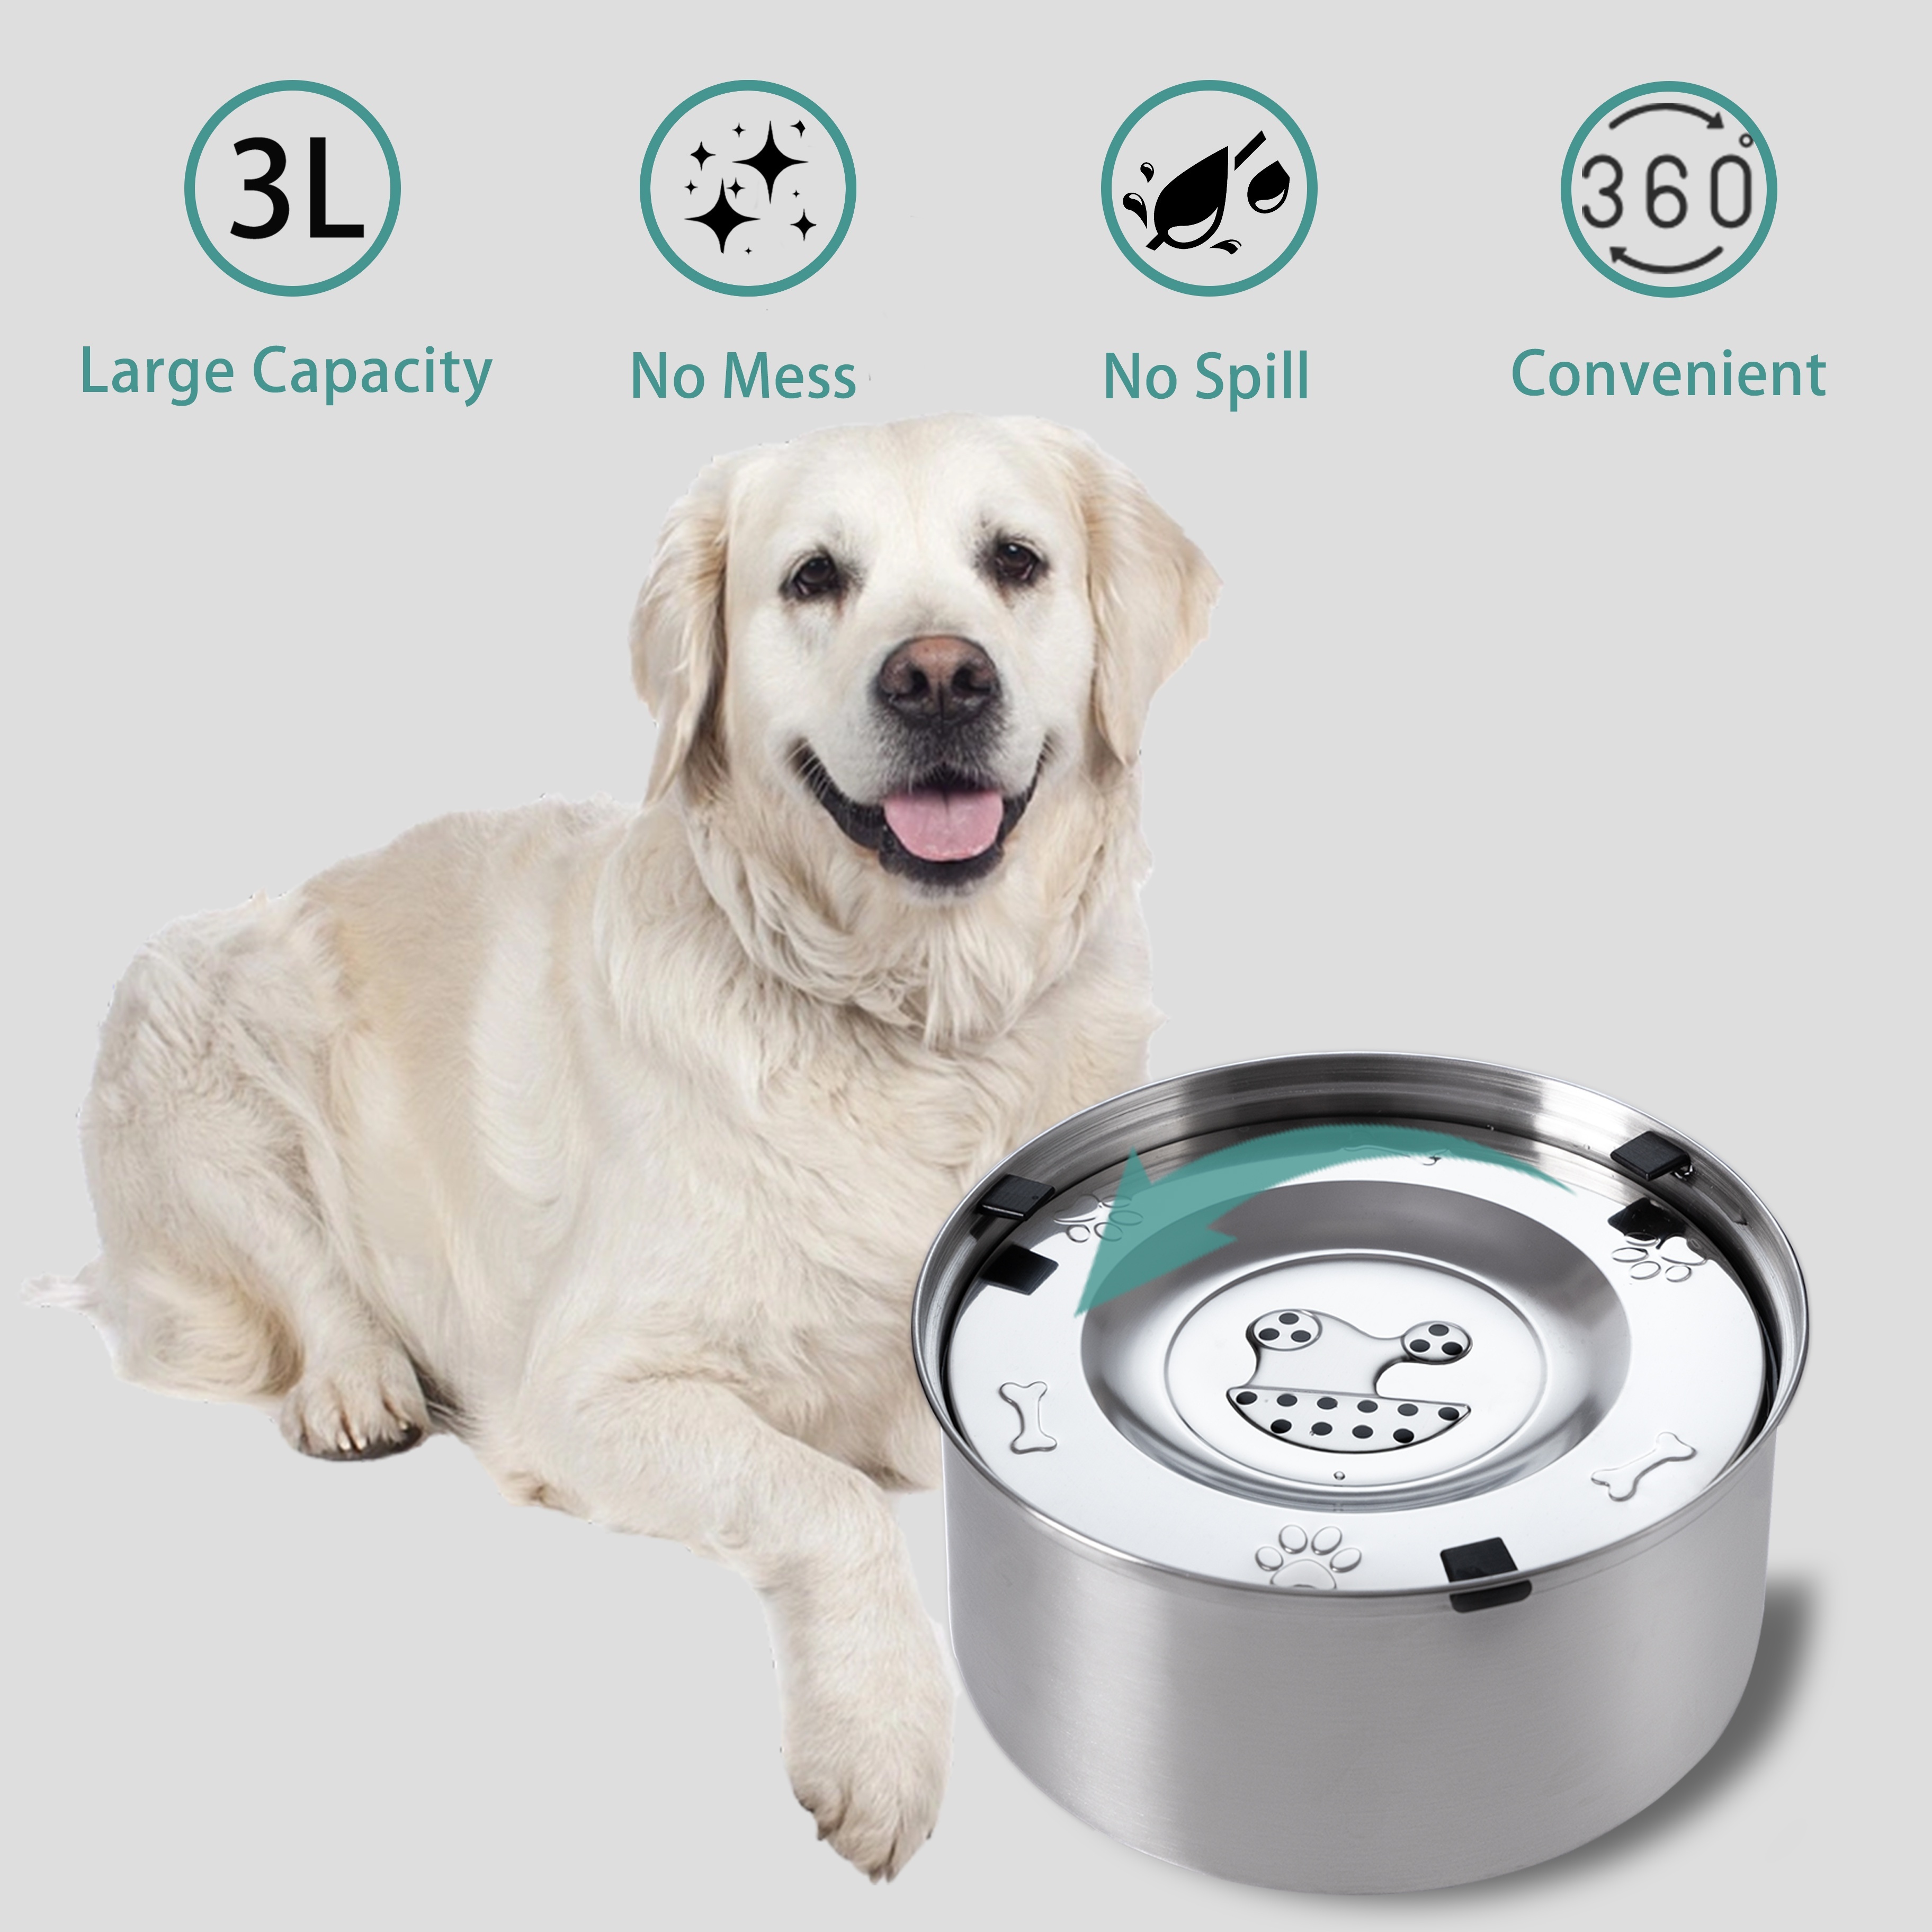 1PC Big Dog Water Bowl With Floating Non-Wetting Mouth Dog Bowl